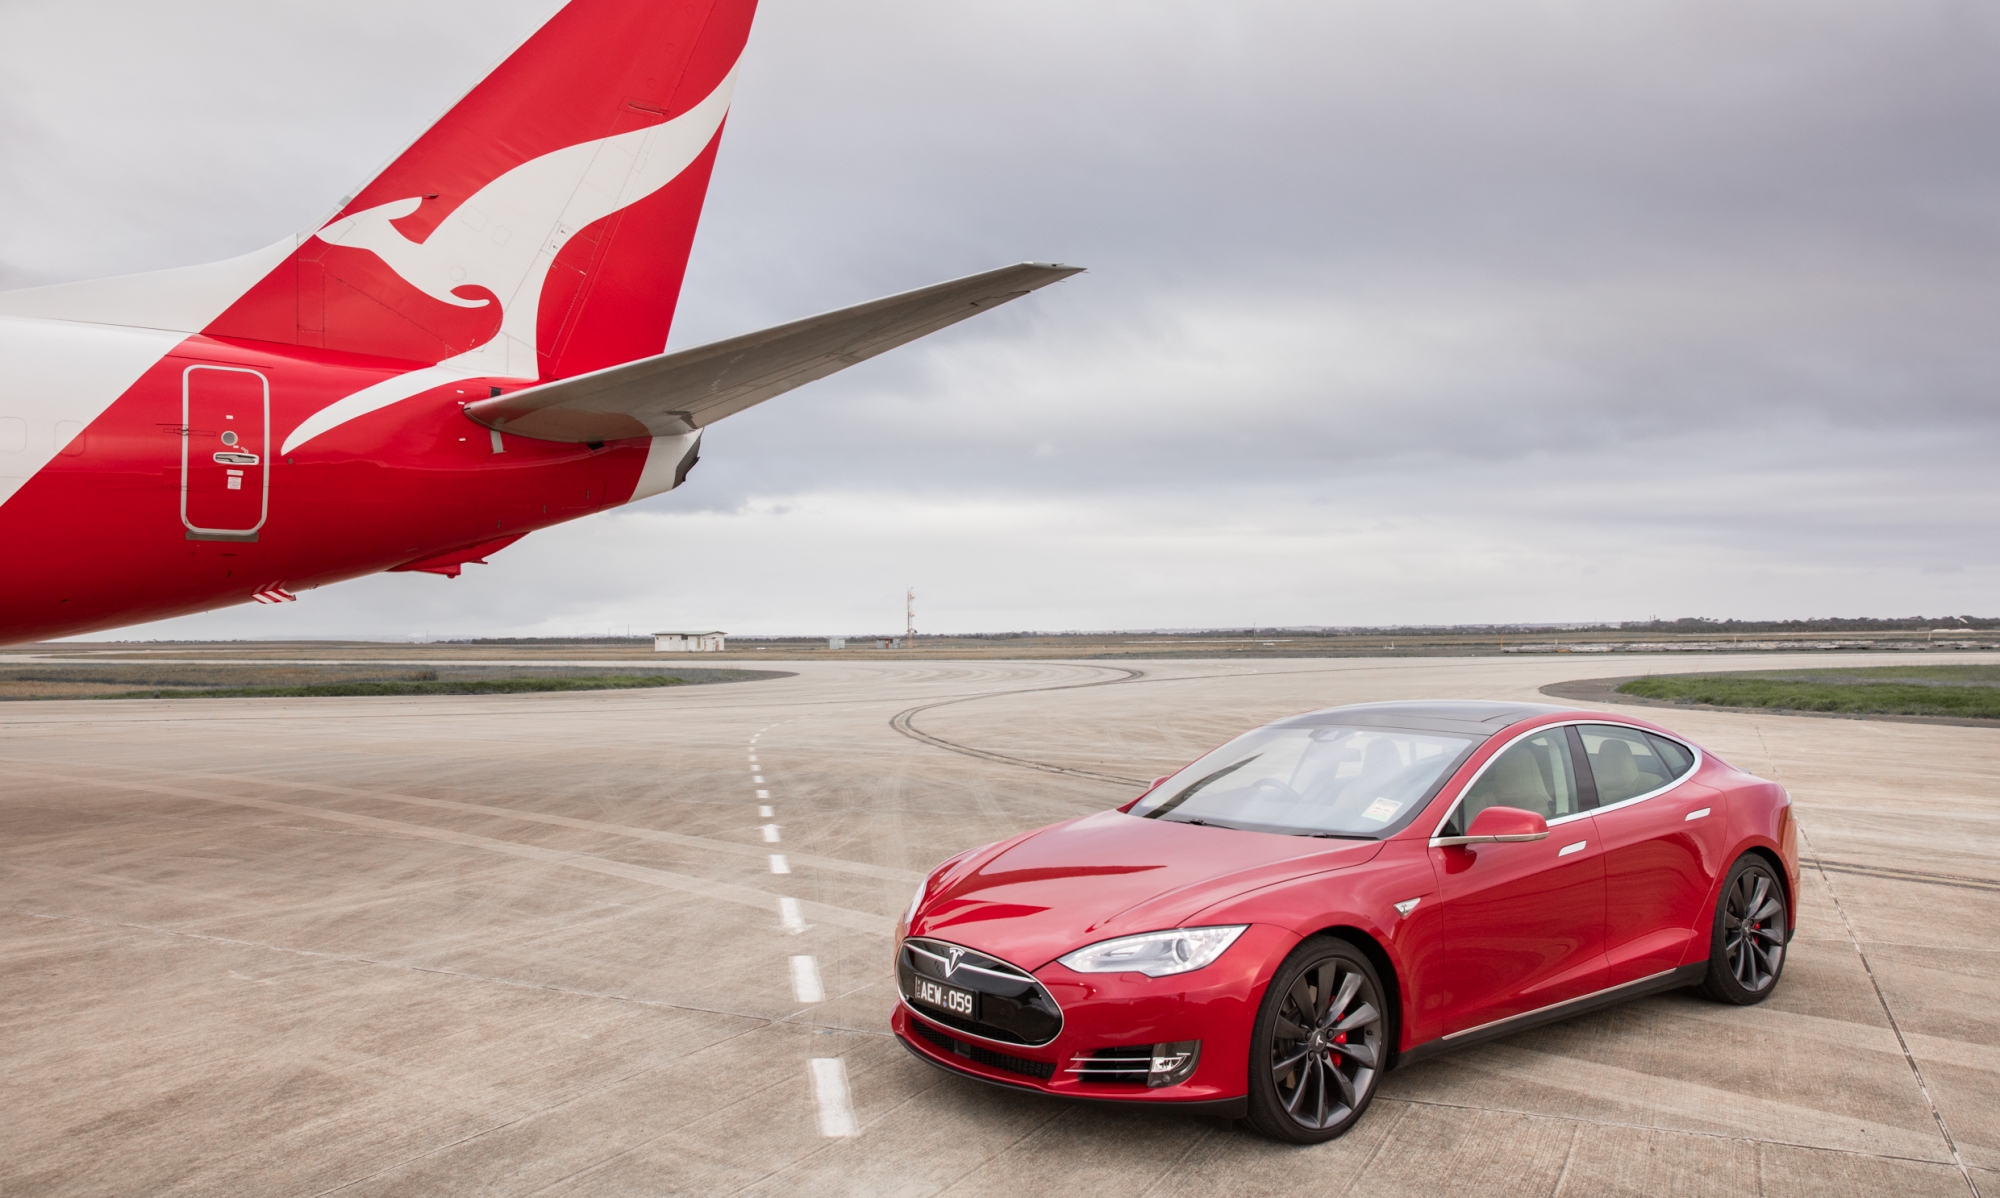 a qantas plane races a tesla in cross promotion to push sustainability